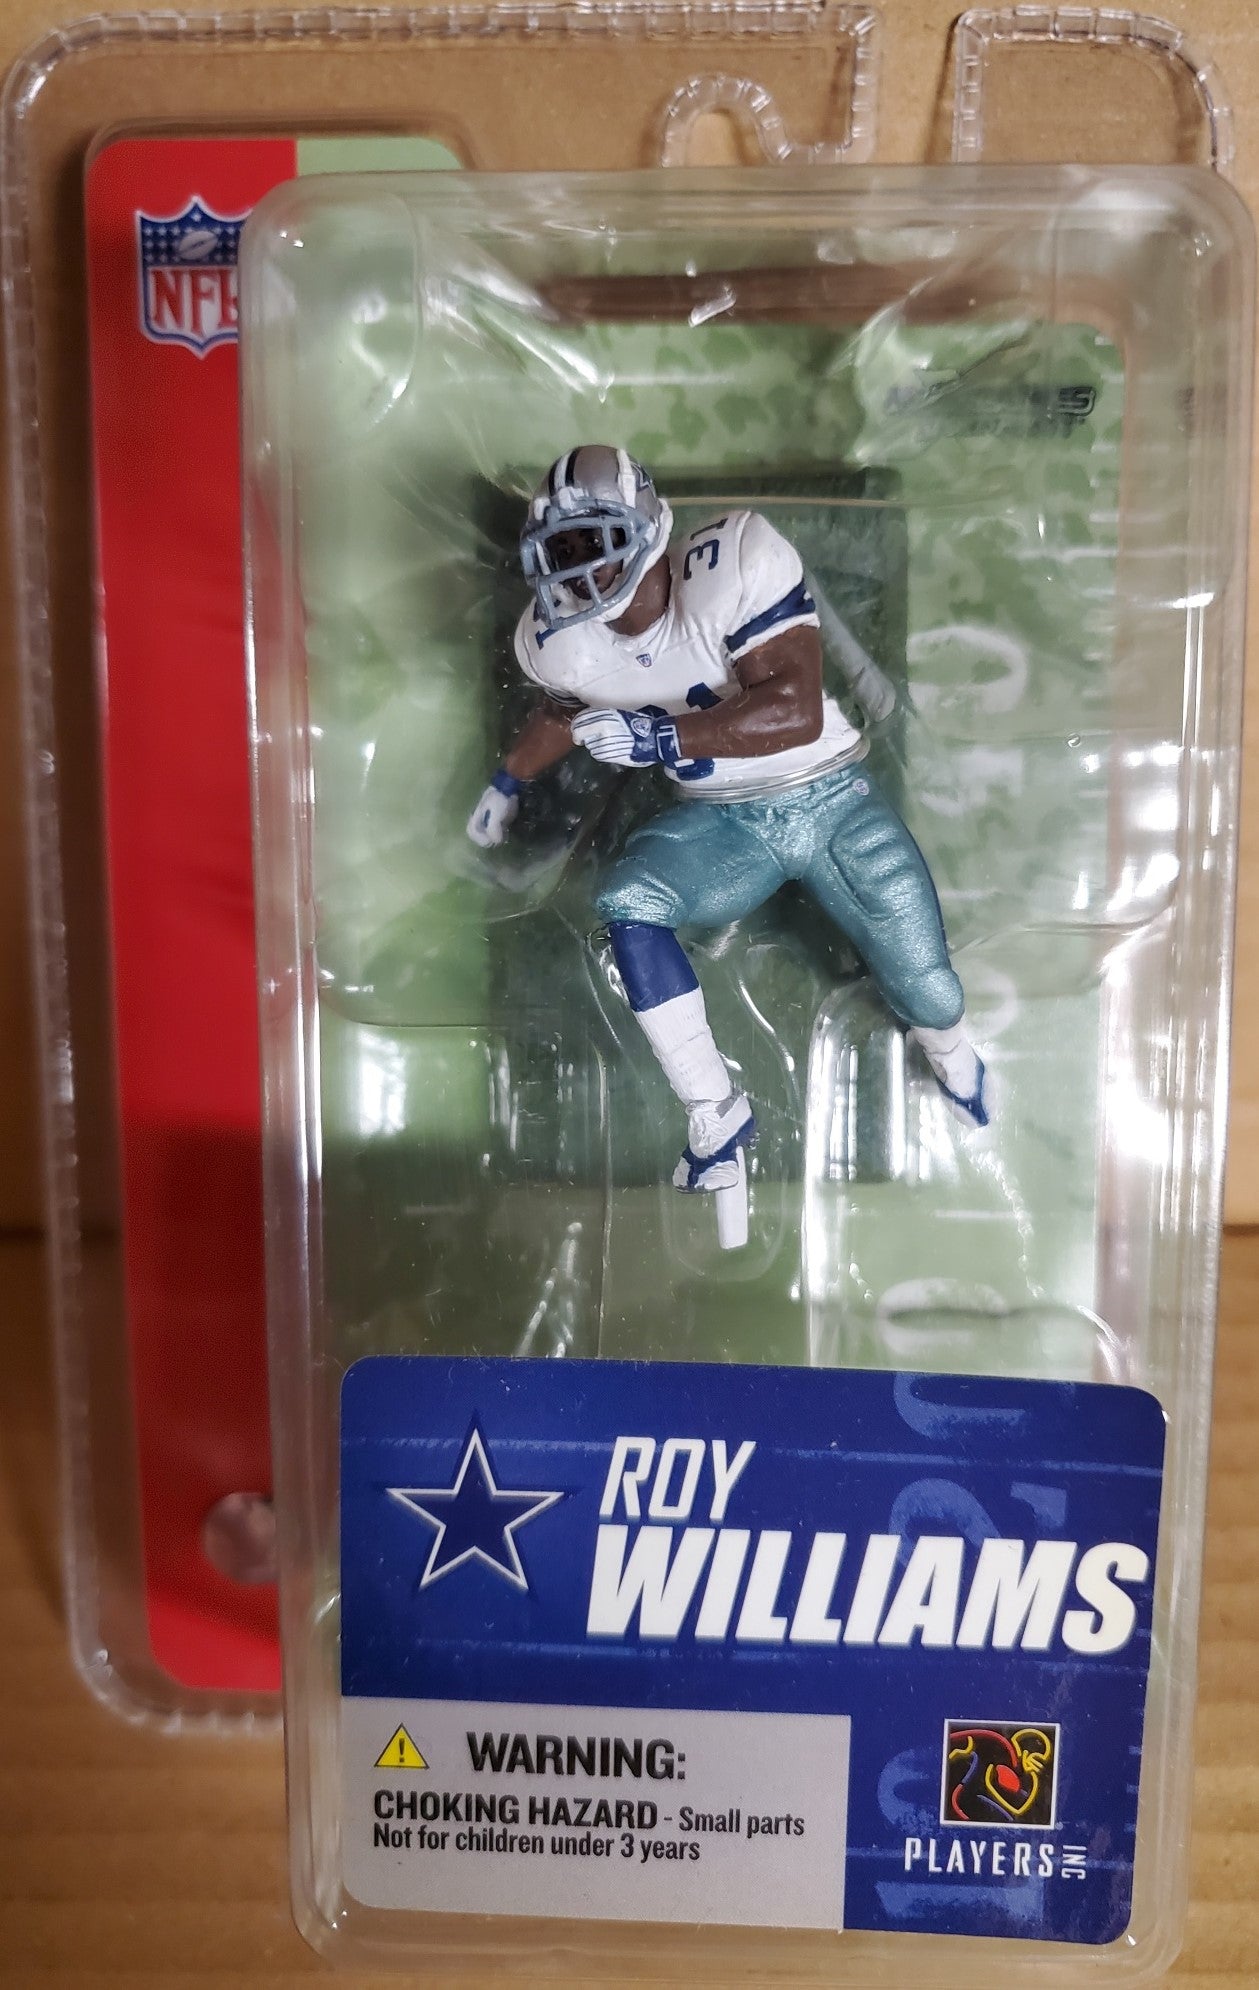 NFL 3 inch Roy Williams action figure